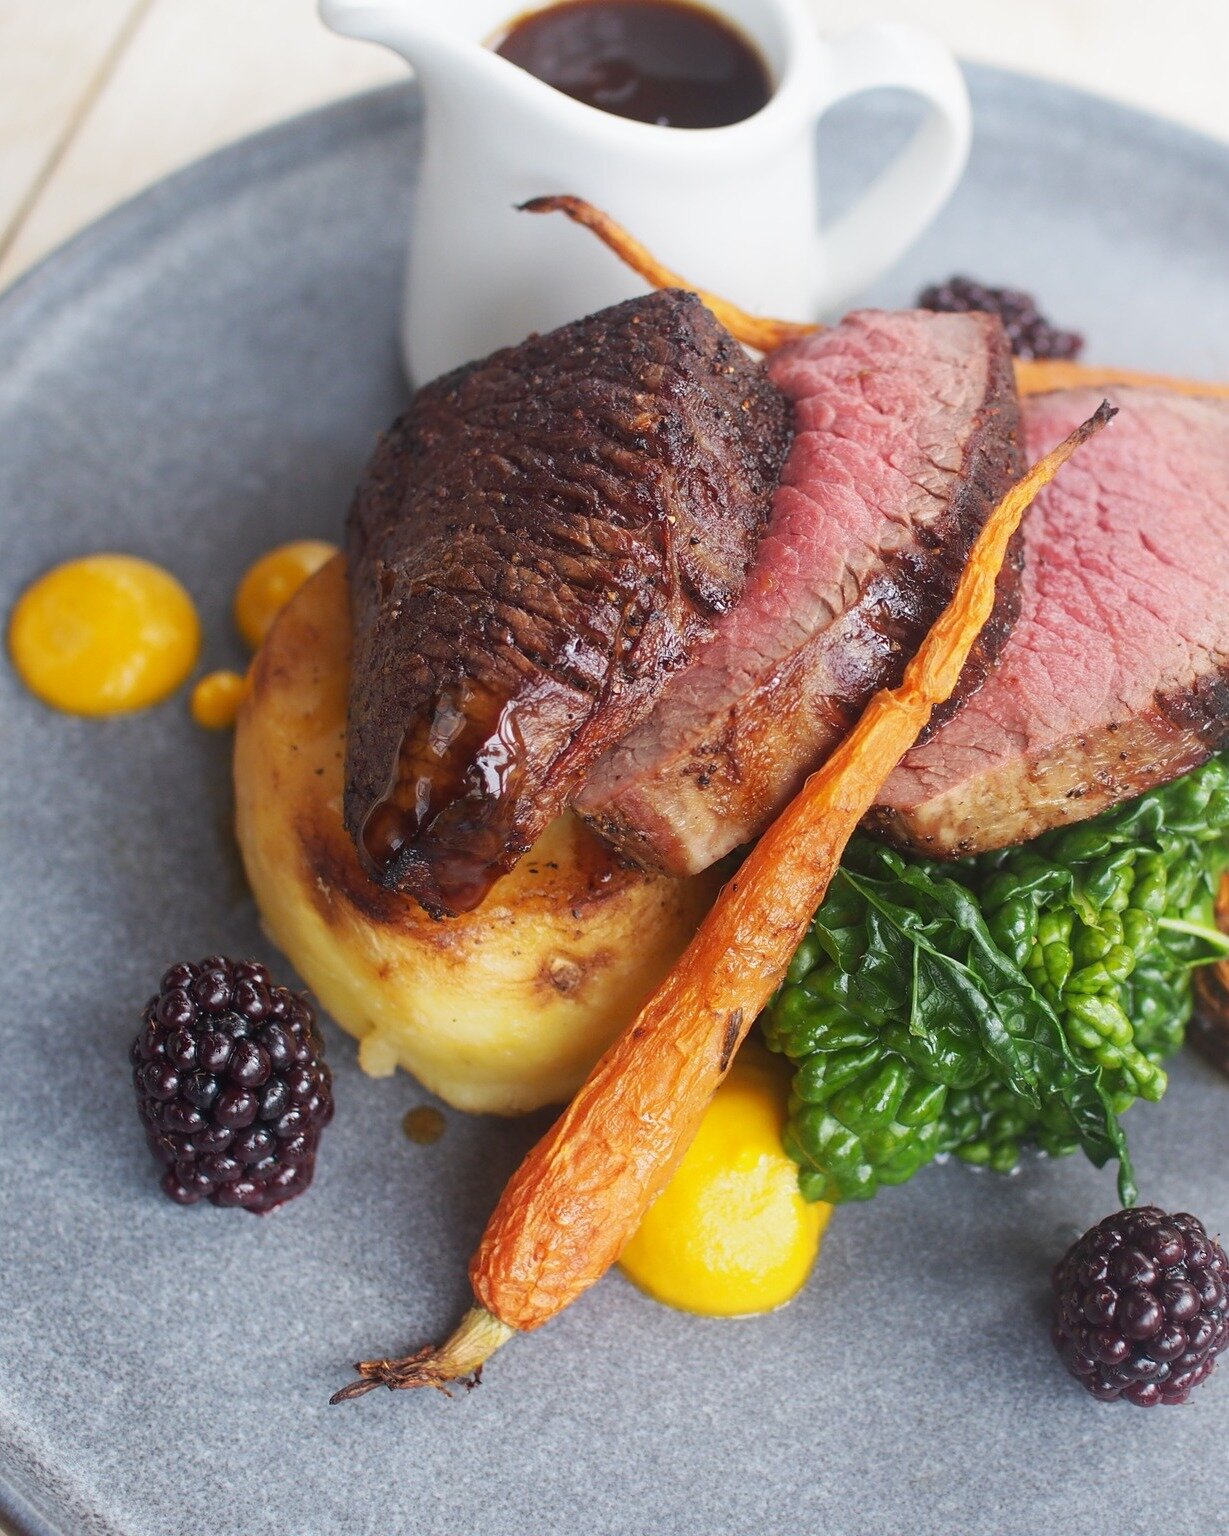 Game on!

Join us next Thursday 29th February for a three-course special menu showcasing the very best game our local countryside has to offer, including a game pithivier and venison haunch steak.

Book in via our #linkinbio

#gamenight #thetickell #